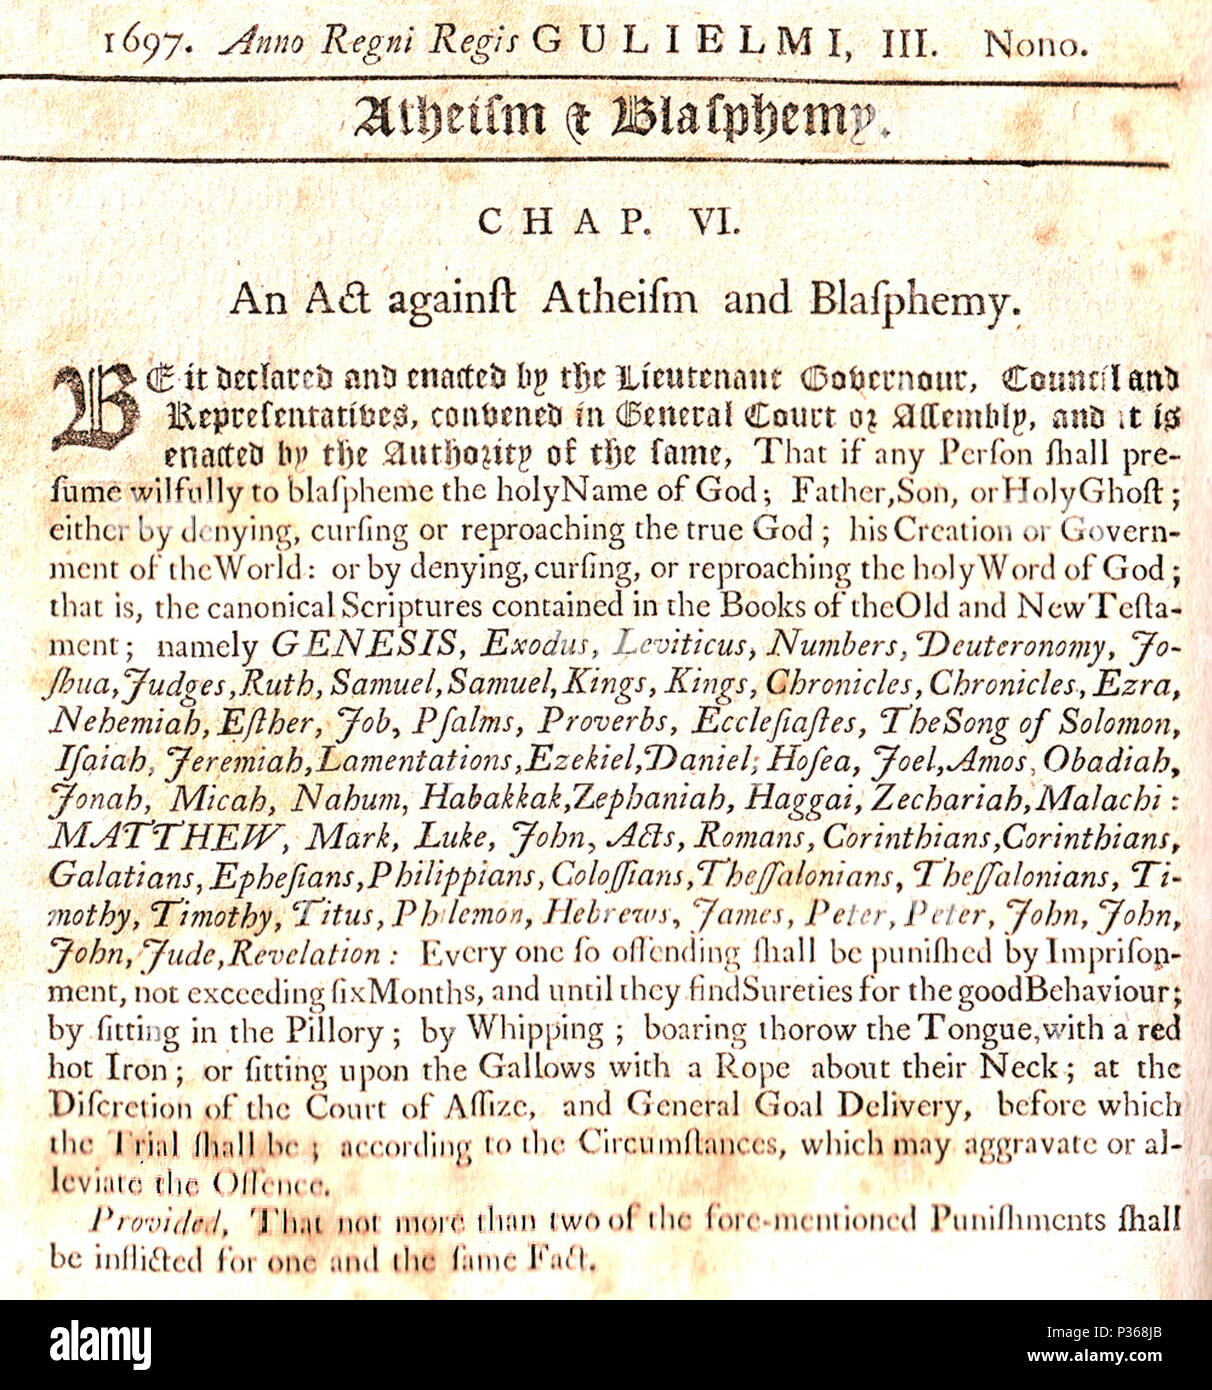 English: An Act against Atheism and Blasphemy, Massachusetts Bay